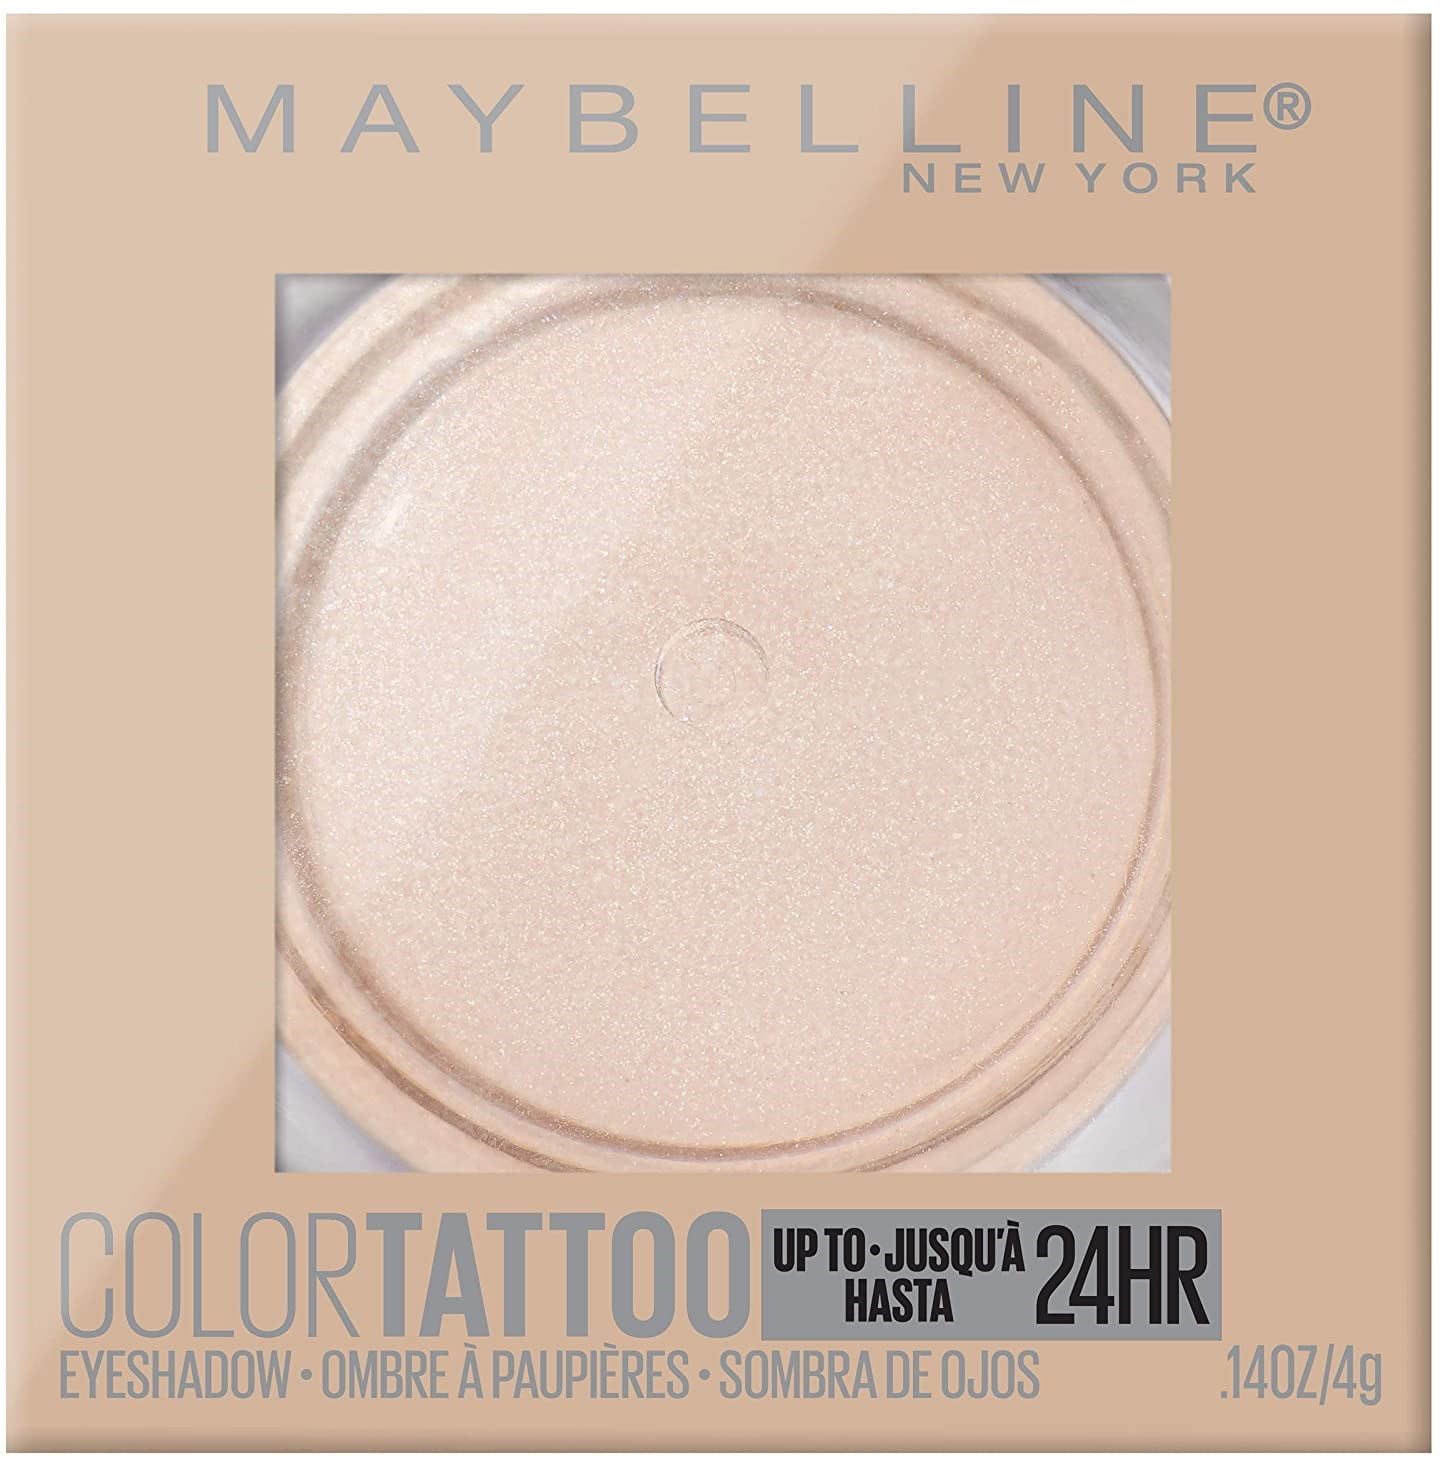 Maybelline Spring 2014 Color Tattoo Eyeshadow Reviews and Swatches  Coffee   Makeup